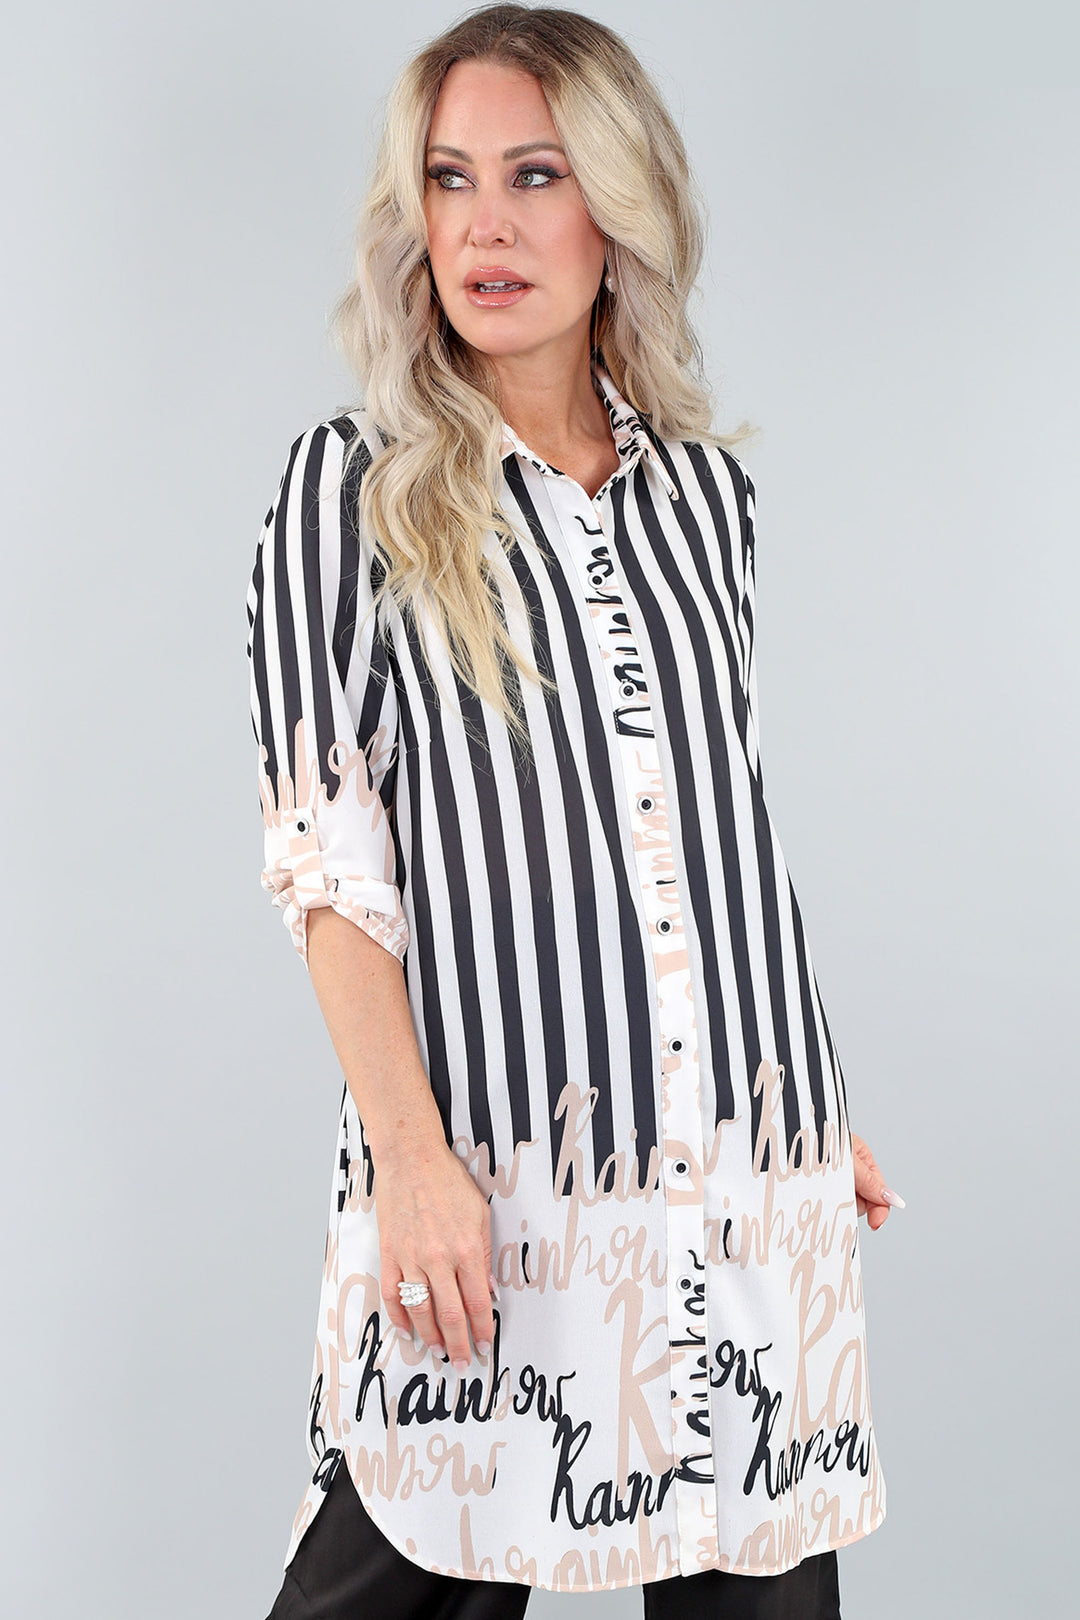 Crafted from airy faille fabric, this top boasts 3/4 length rolled sleeves and a neat letter print. 